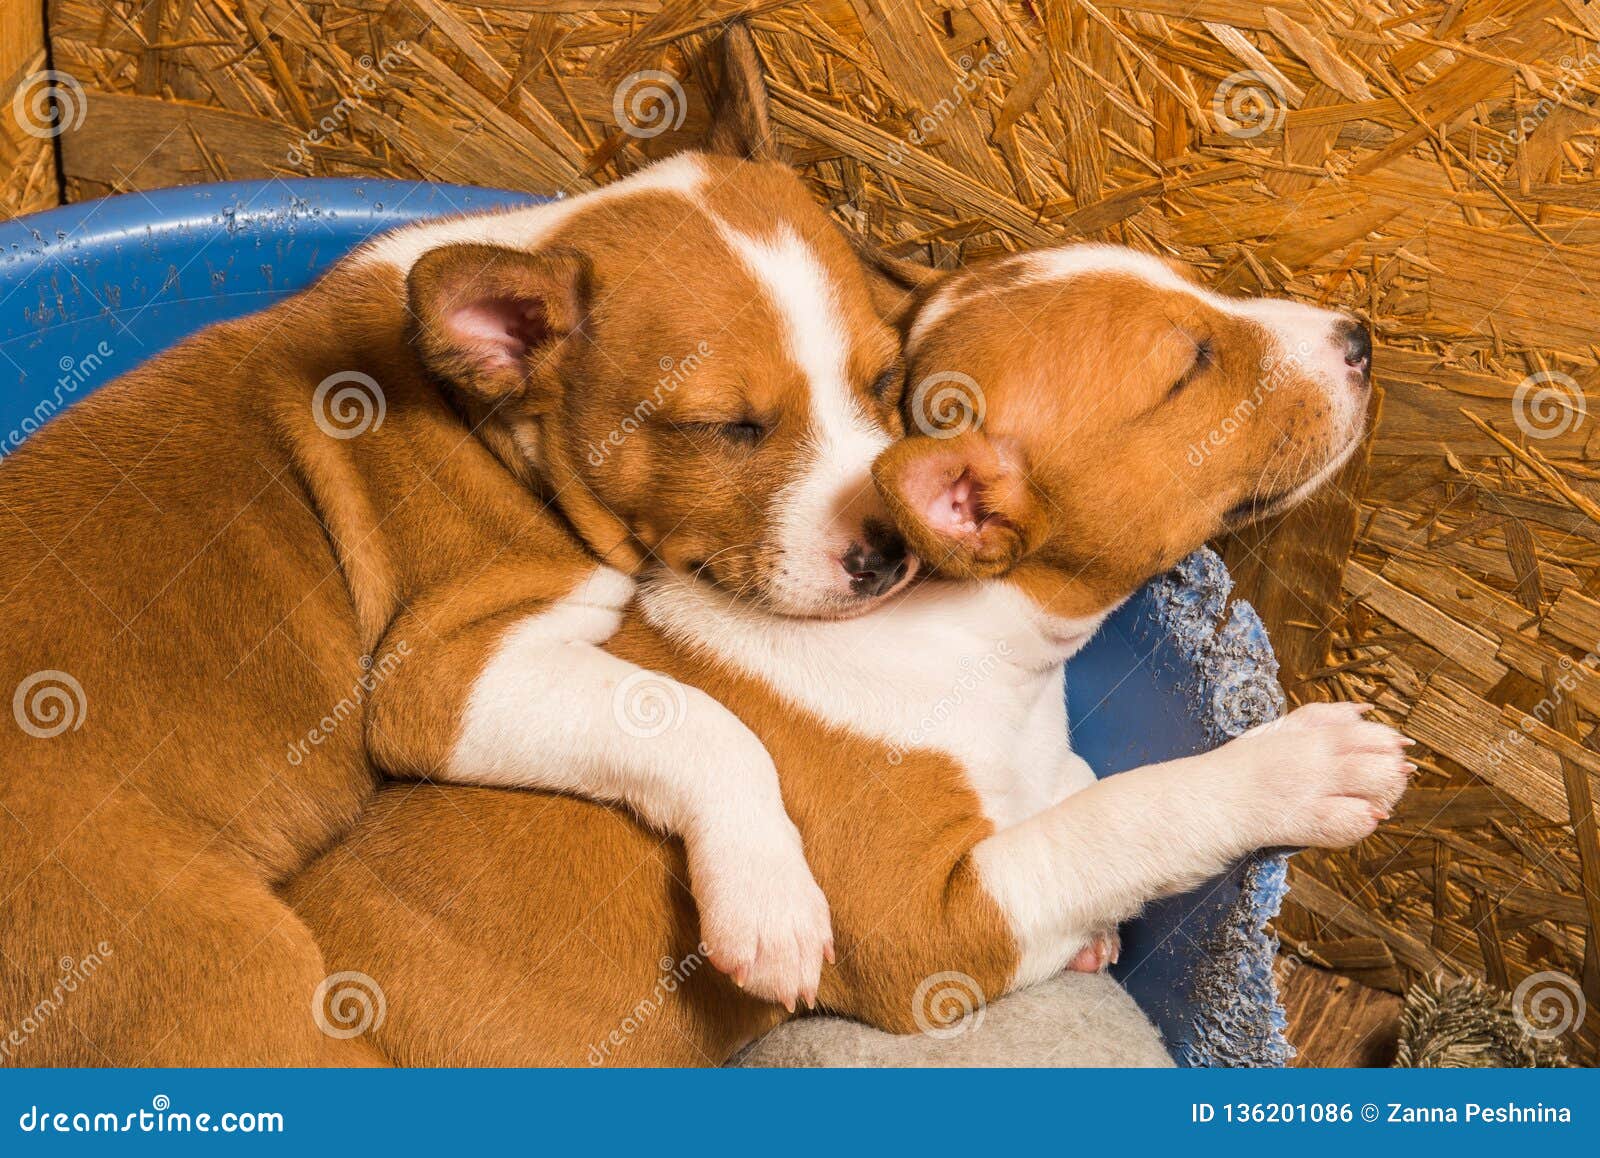 Funny Small Babies Two Basenji Puppies Dogs Are Sleeping